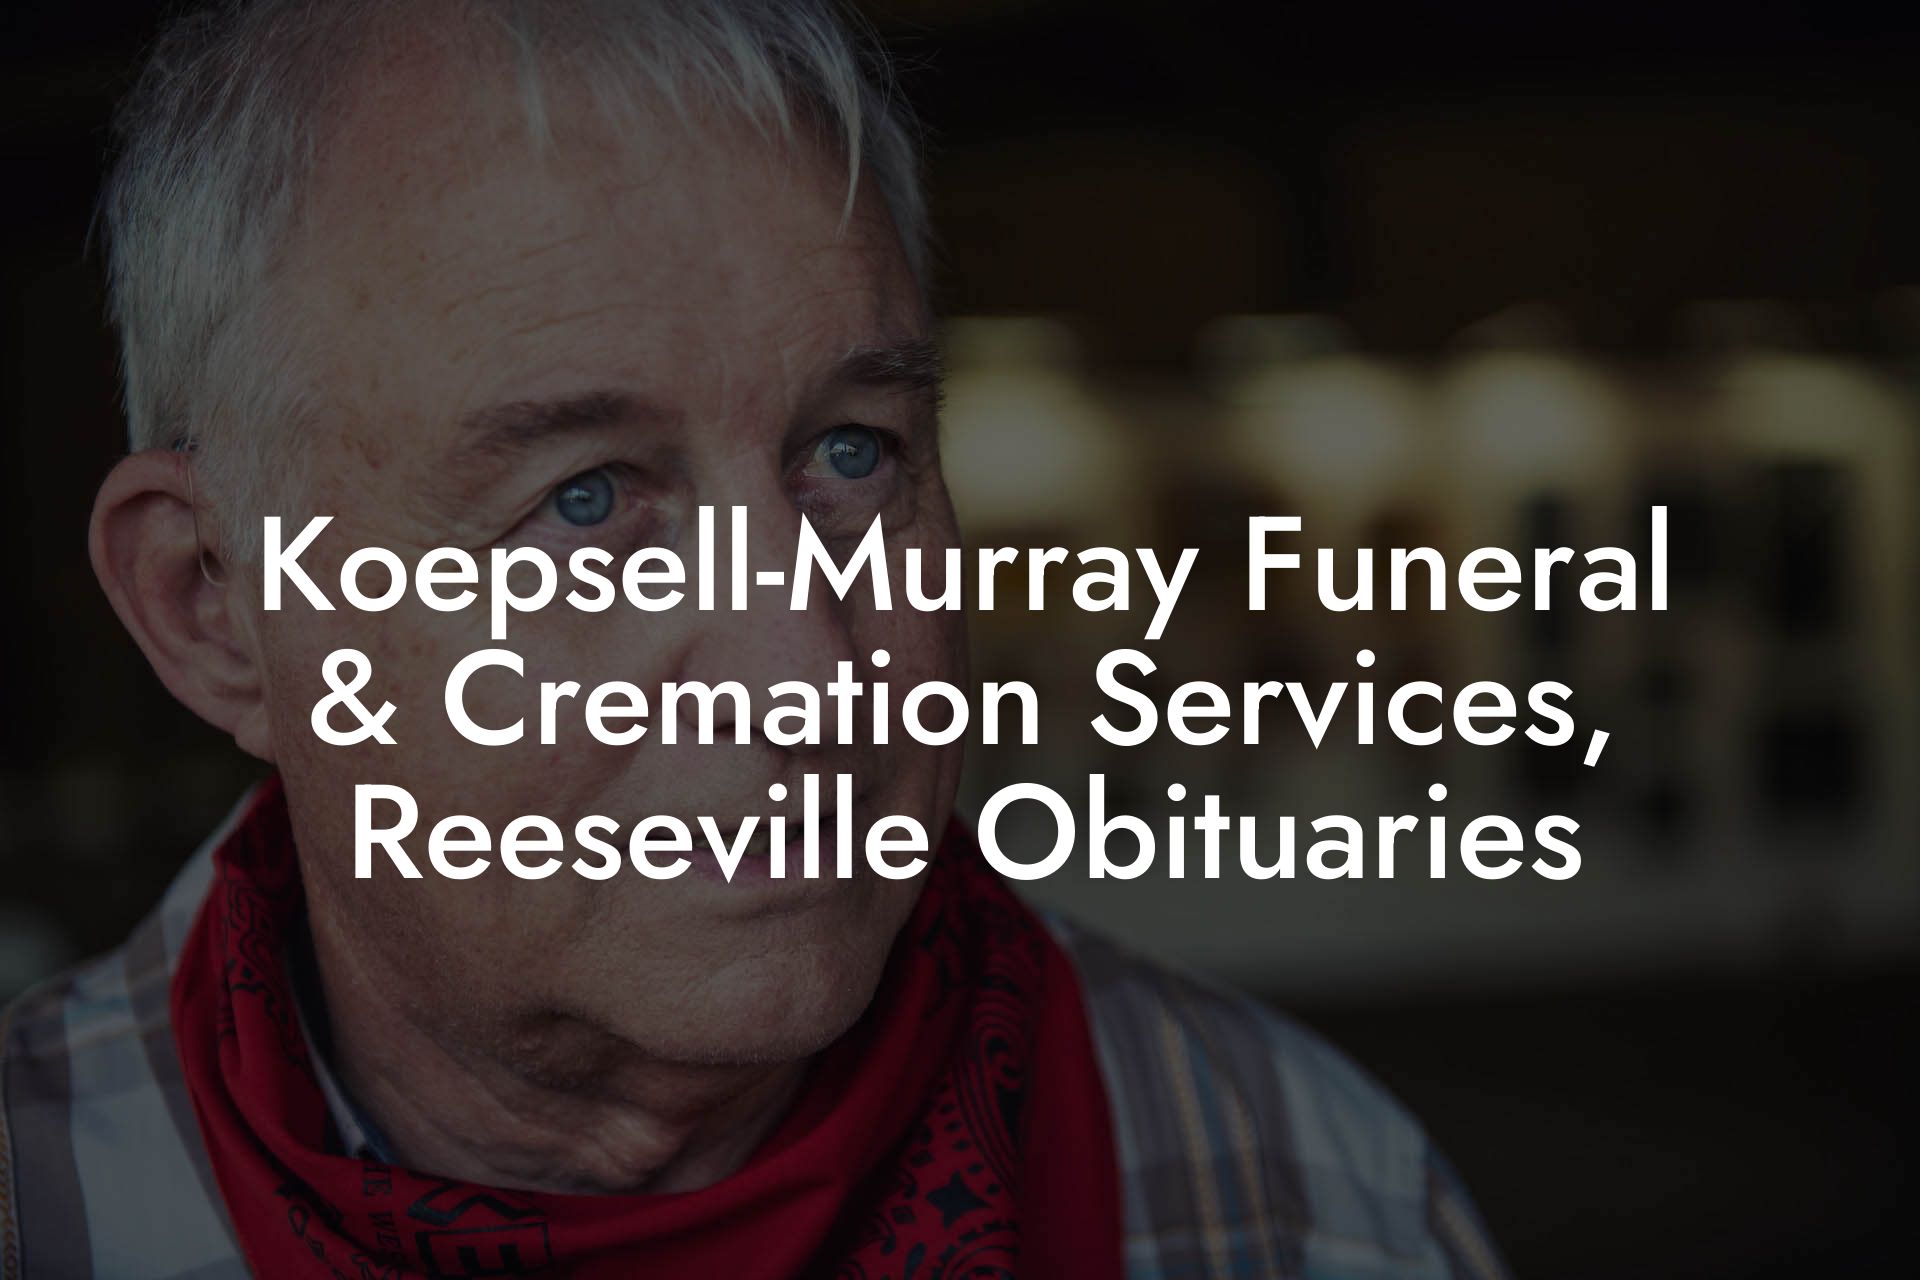 Koepsell-Murray Funeral & Cremation Services, Reeseville Obituaries